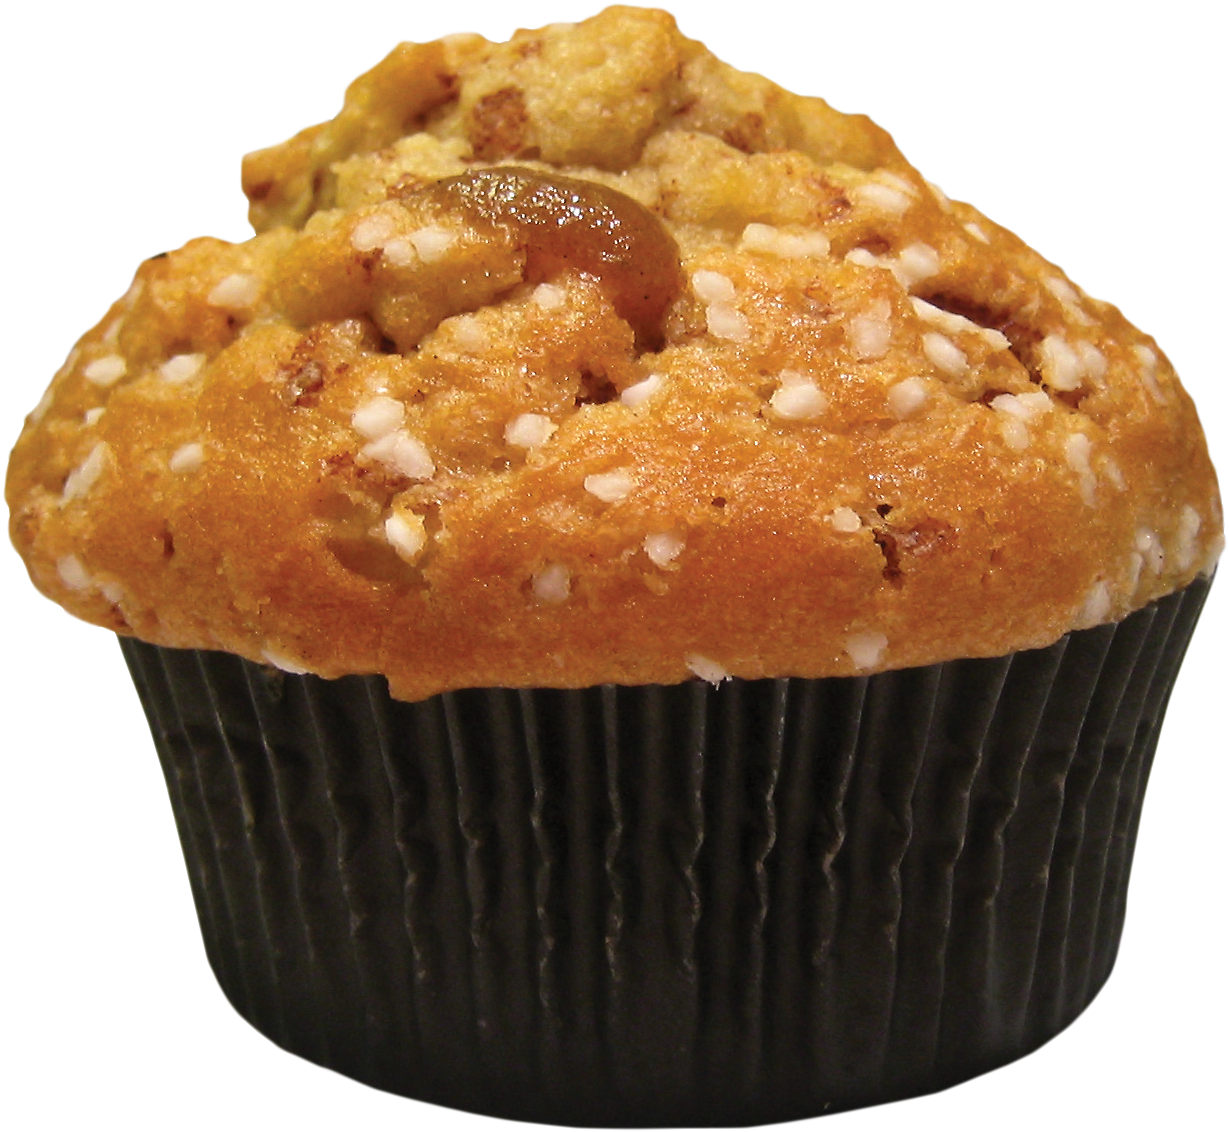 A Muffin With White Specks On Top